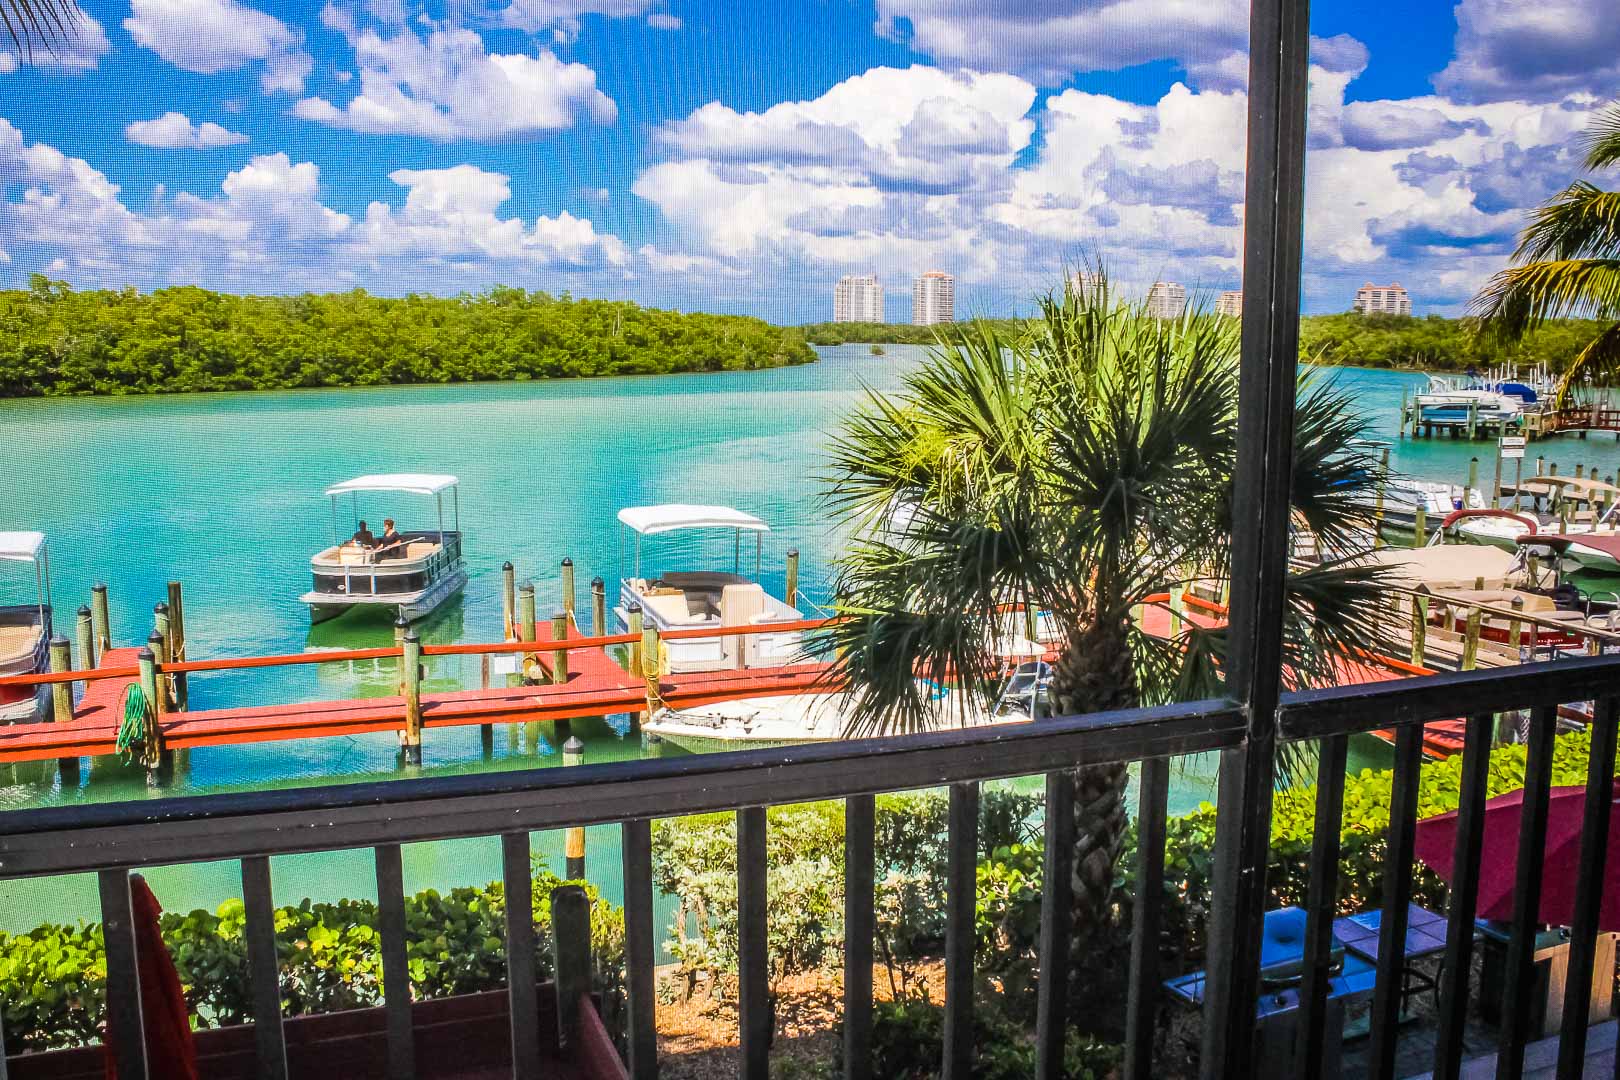 A vibrant beach view from the balcony at VRI's Bonita Resort and Club in Florida.